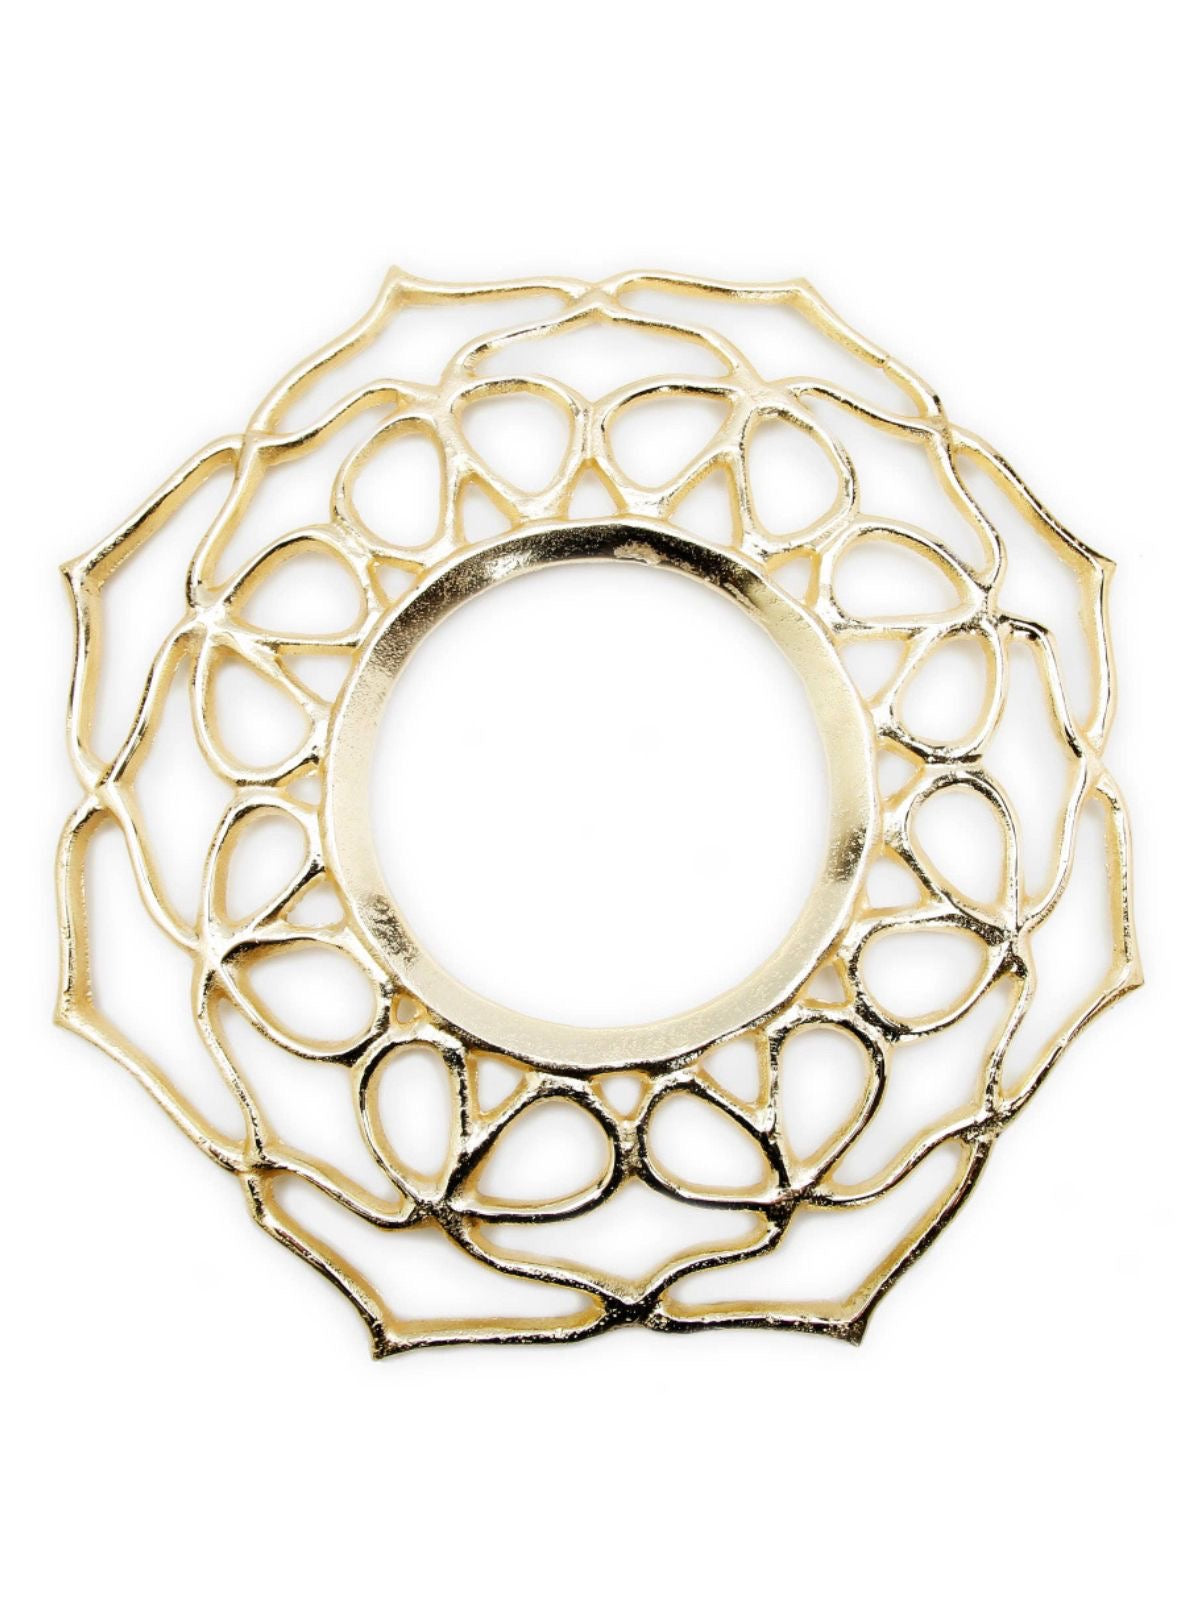 This 15.5D gold charger is completed with a fine gold brass iron mesh design to promote a sense of elegance on a rather understated piece. Sold by KYA Home Decor